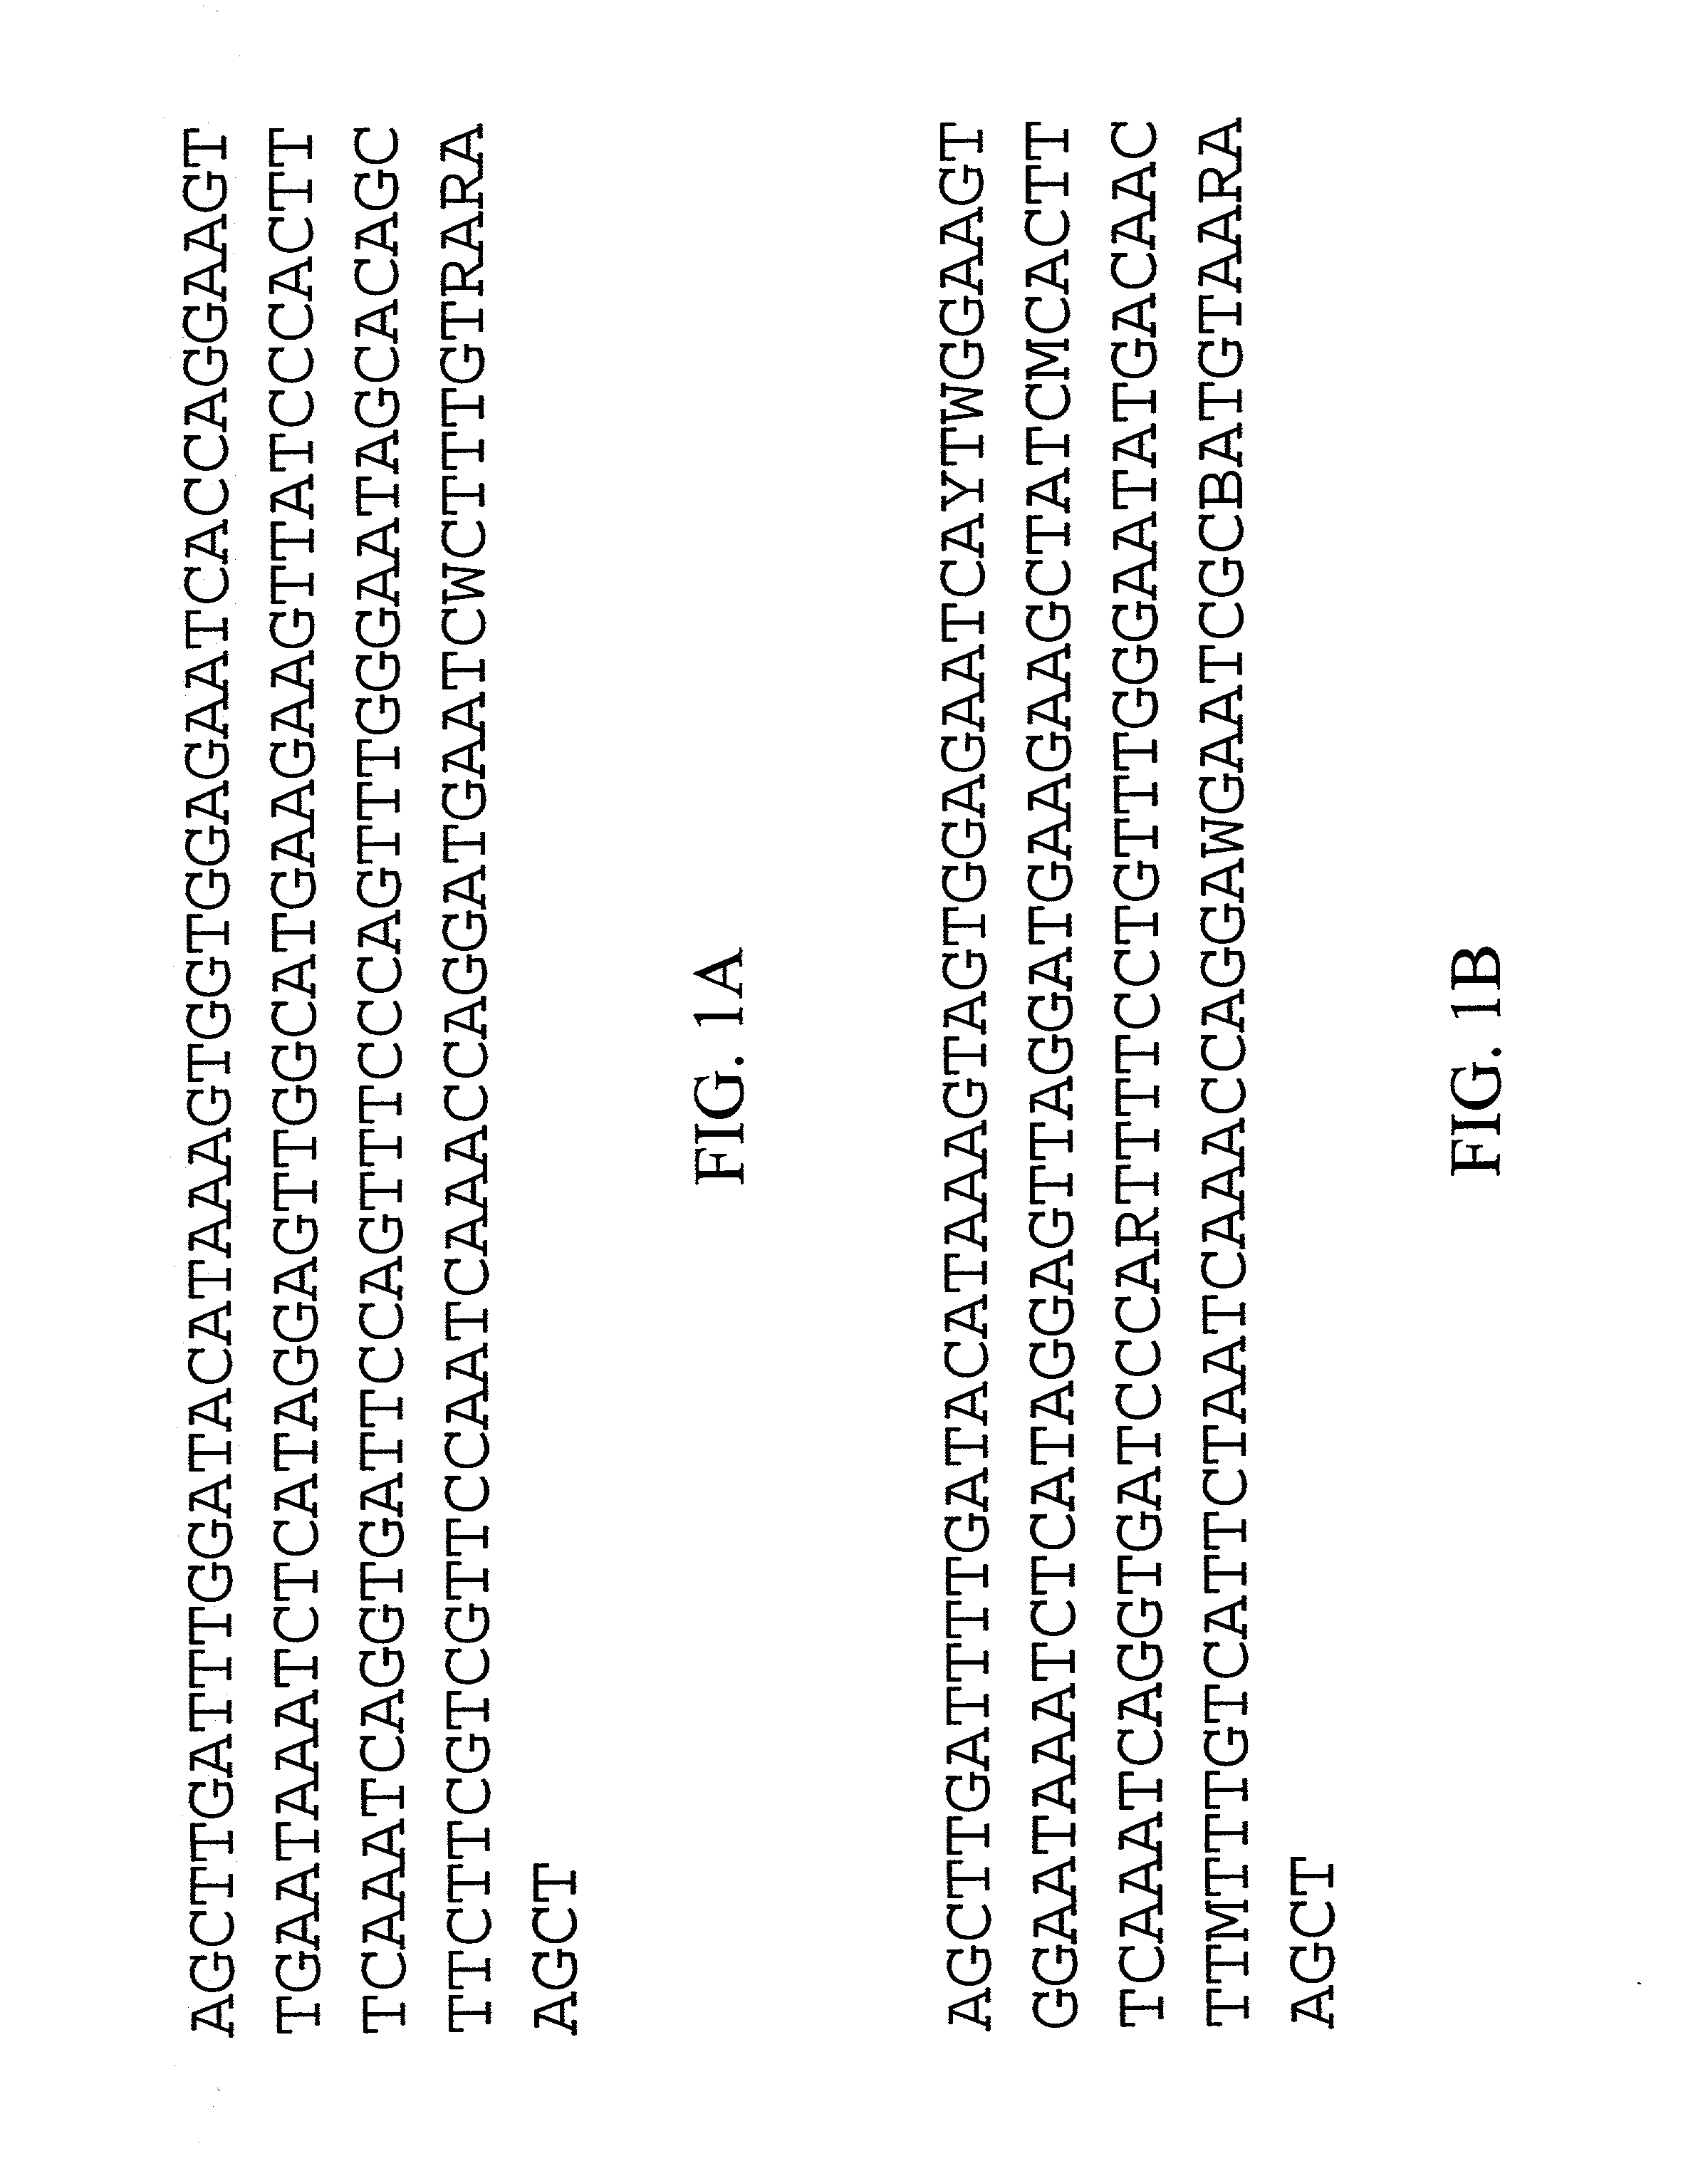 Methods for generating or increasing revenues from crops